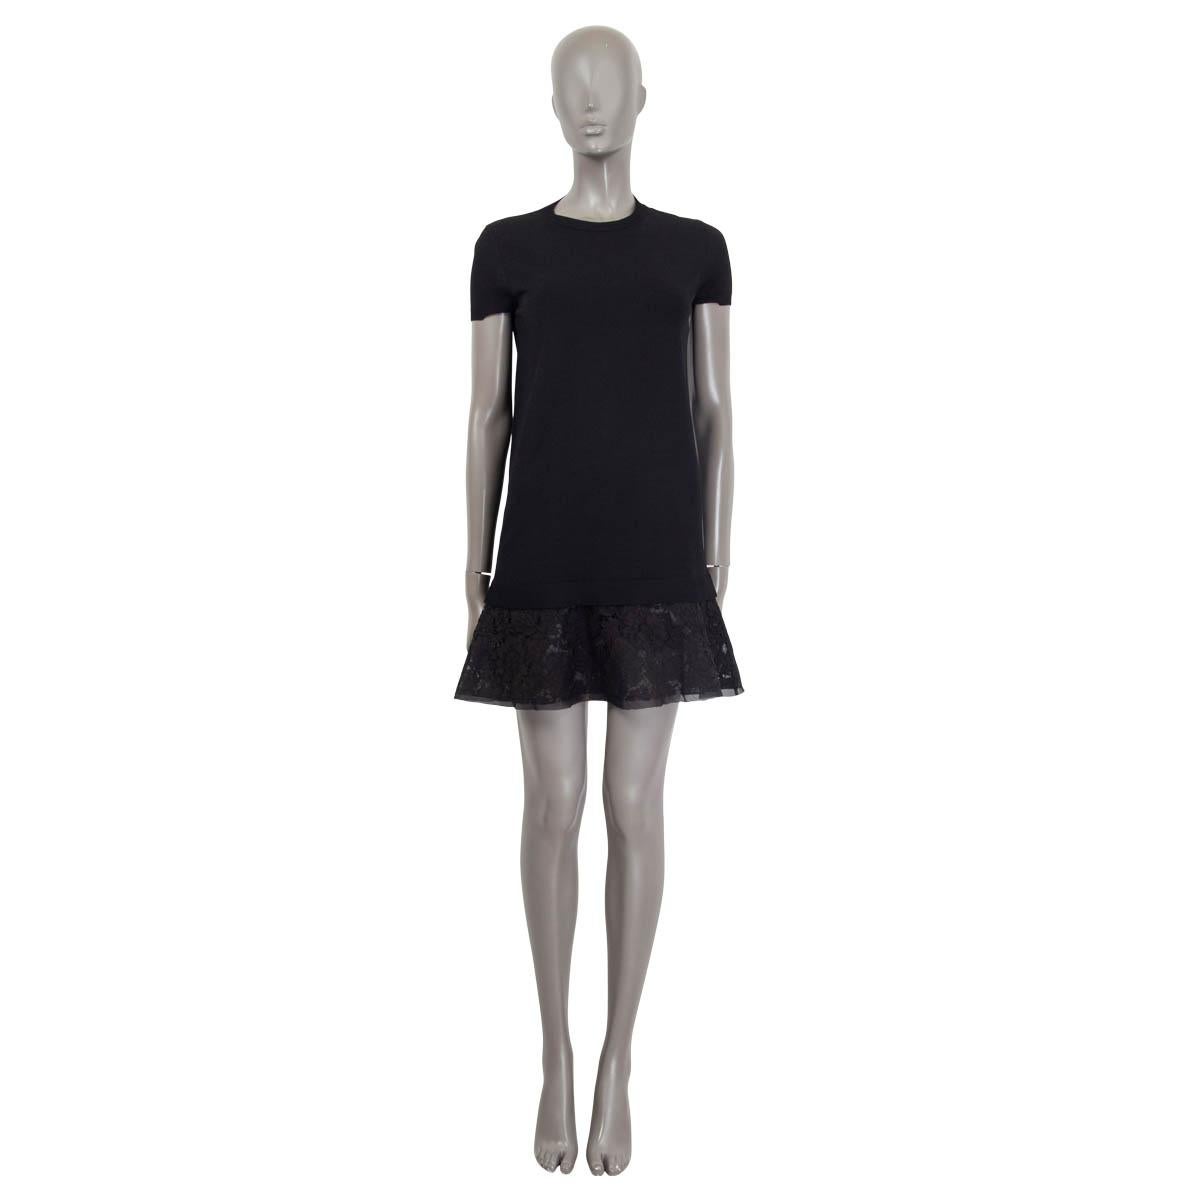 100% authentic Valentino short sleeve knit dress in black viscose (83%) and polyester (17%). Features short sleeves and a lace trim in black cotton (71%), viscose (21%) and polyamide (8%). Lace-trim lined in black silk (100%). Has been worn once and